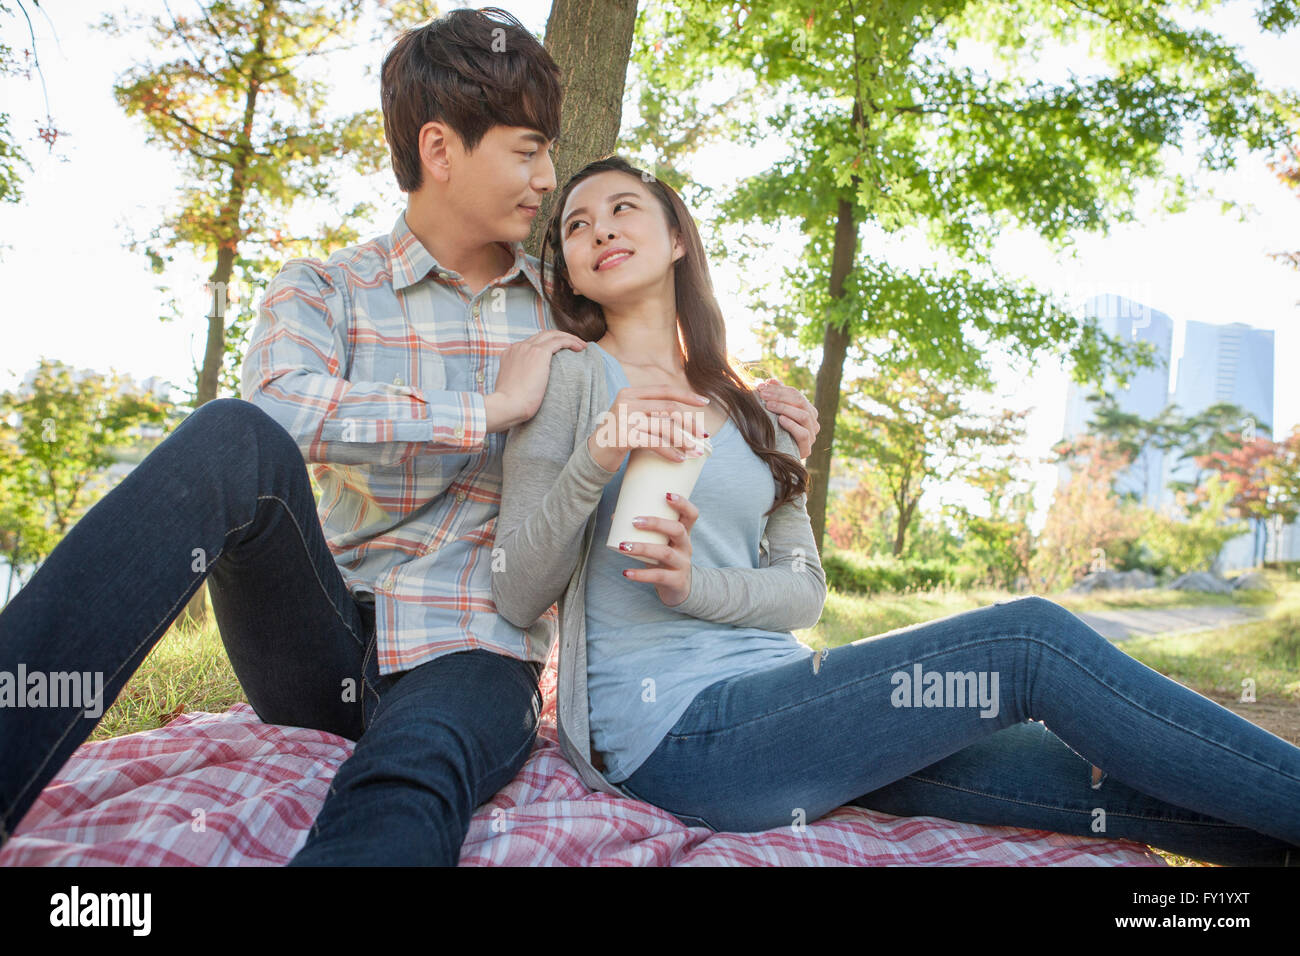 Couple seated on a grass and woman holding a cup of coffee Stock Photo